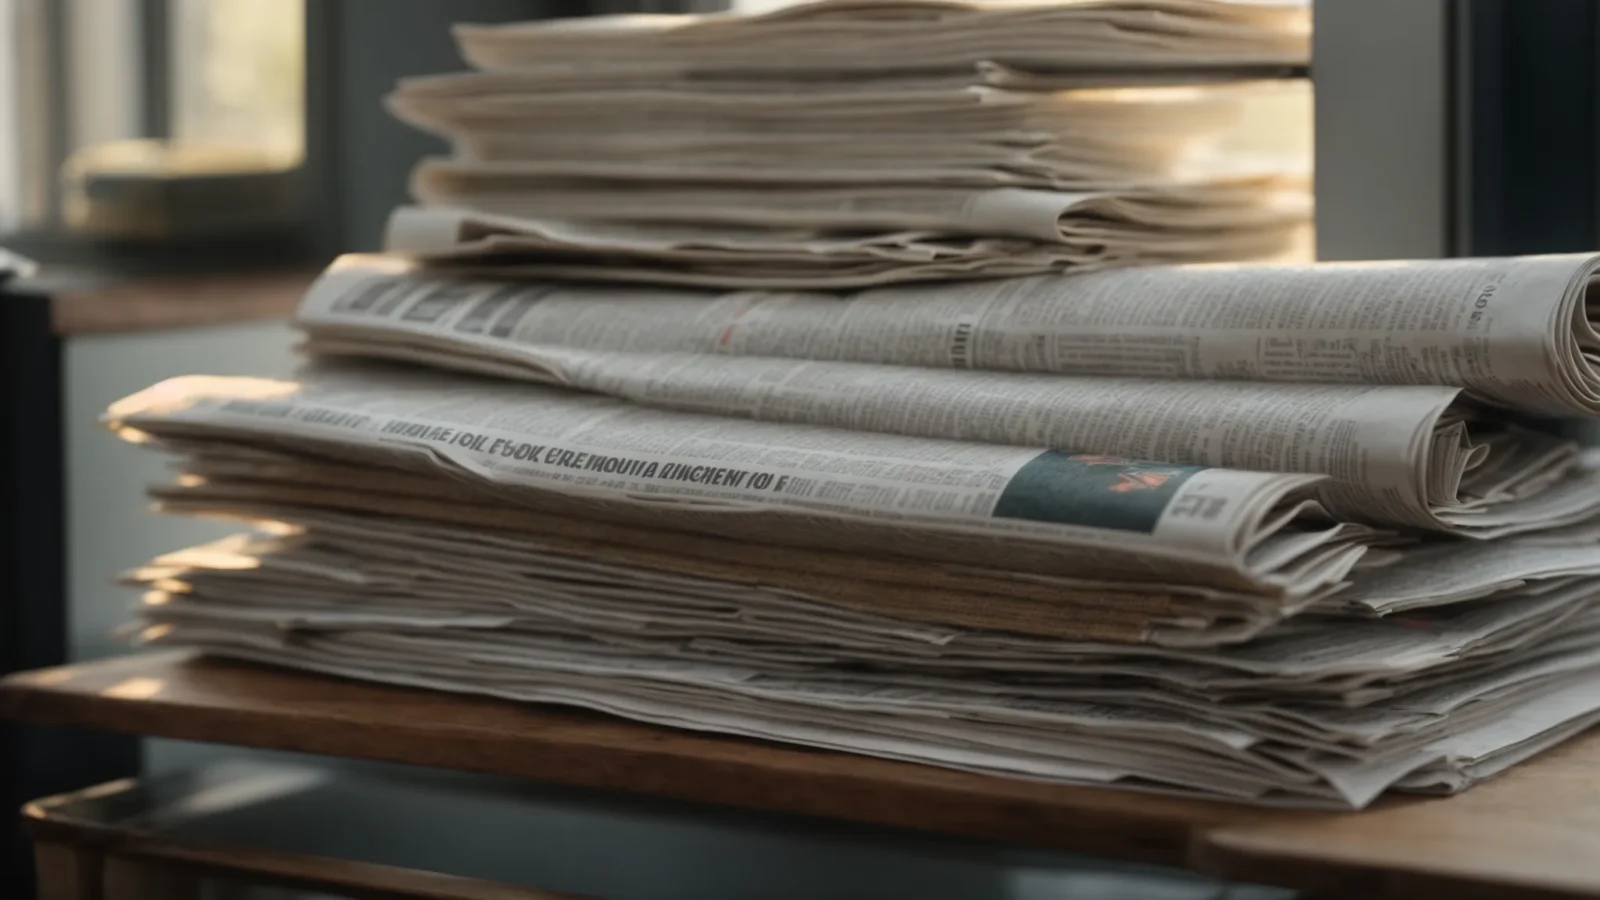 a stack of newspapers sits on a wooden table, illuminated by the soft morning light through a nearby window.